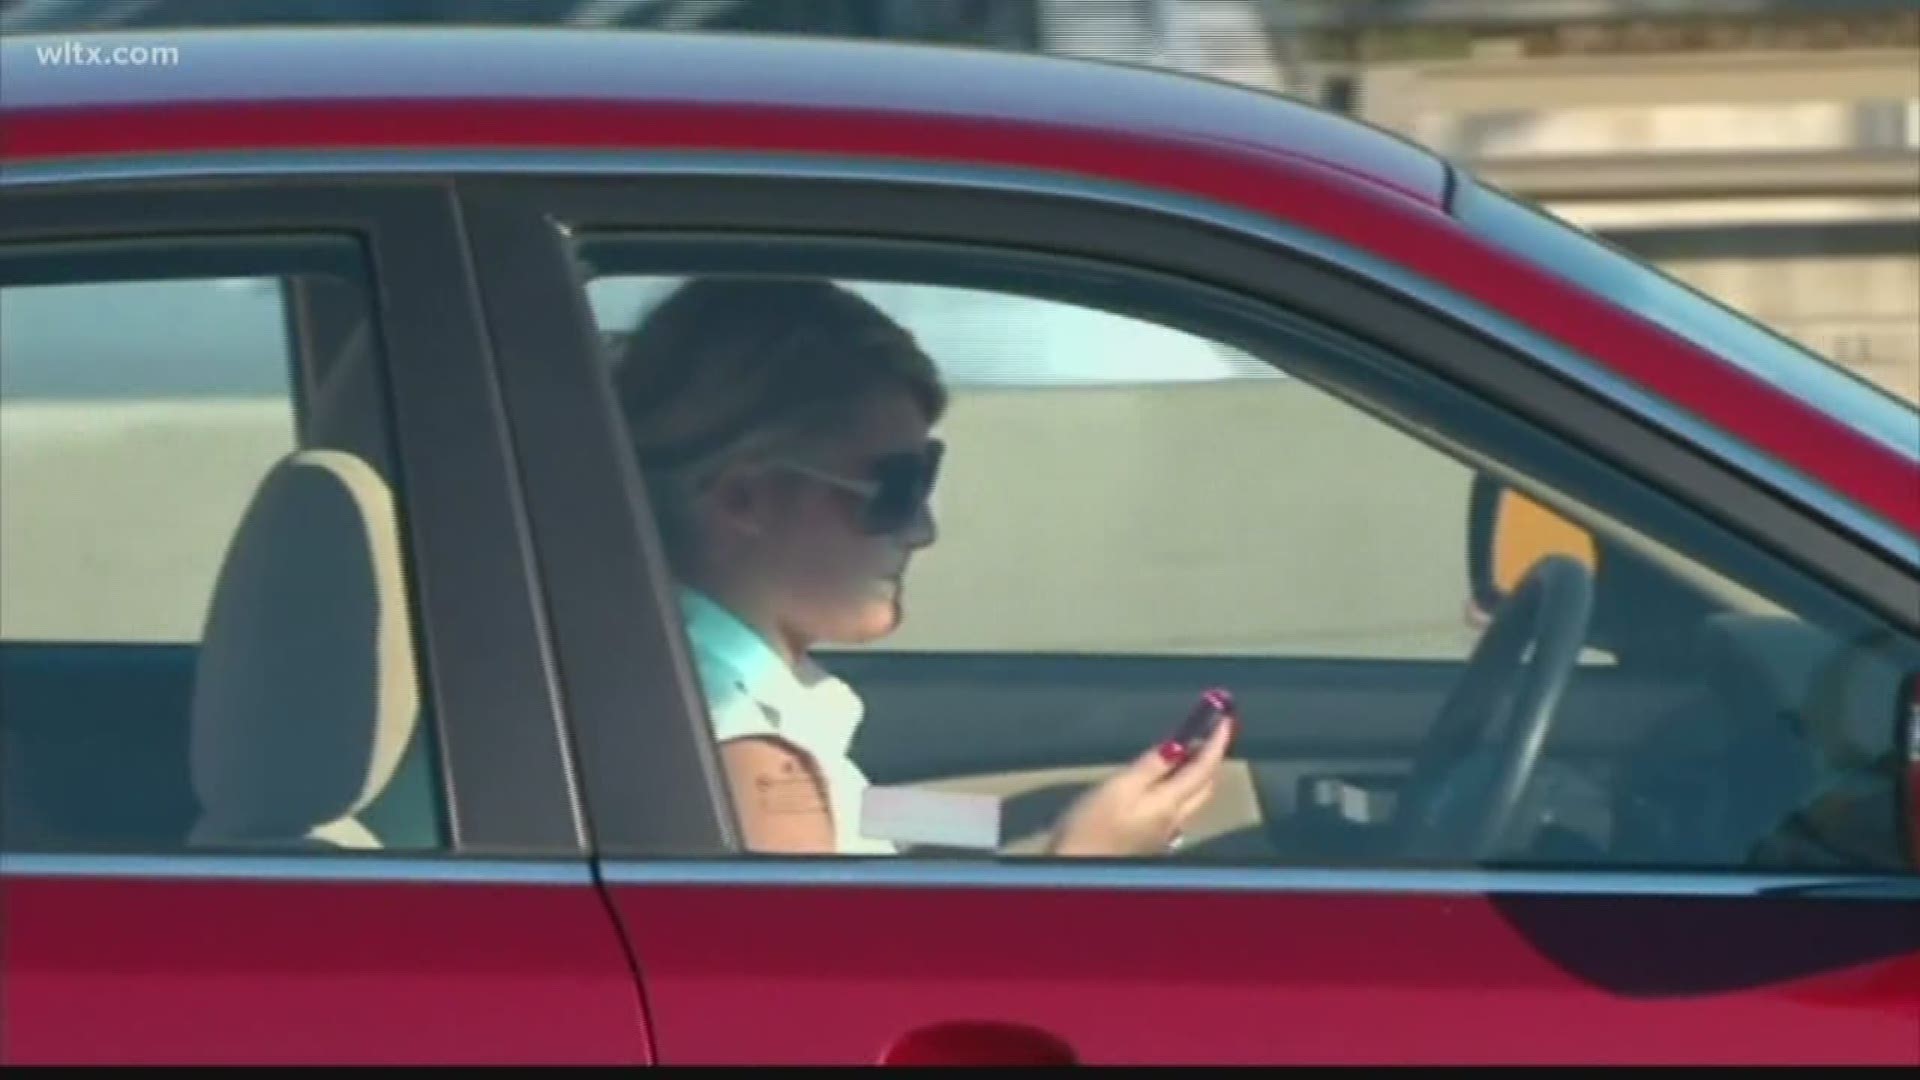 The bill would ban drivers from holding or using a wireless device without an earpiece or Bluetooth